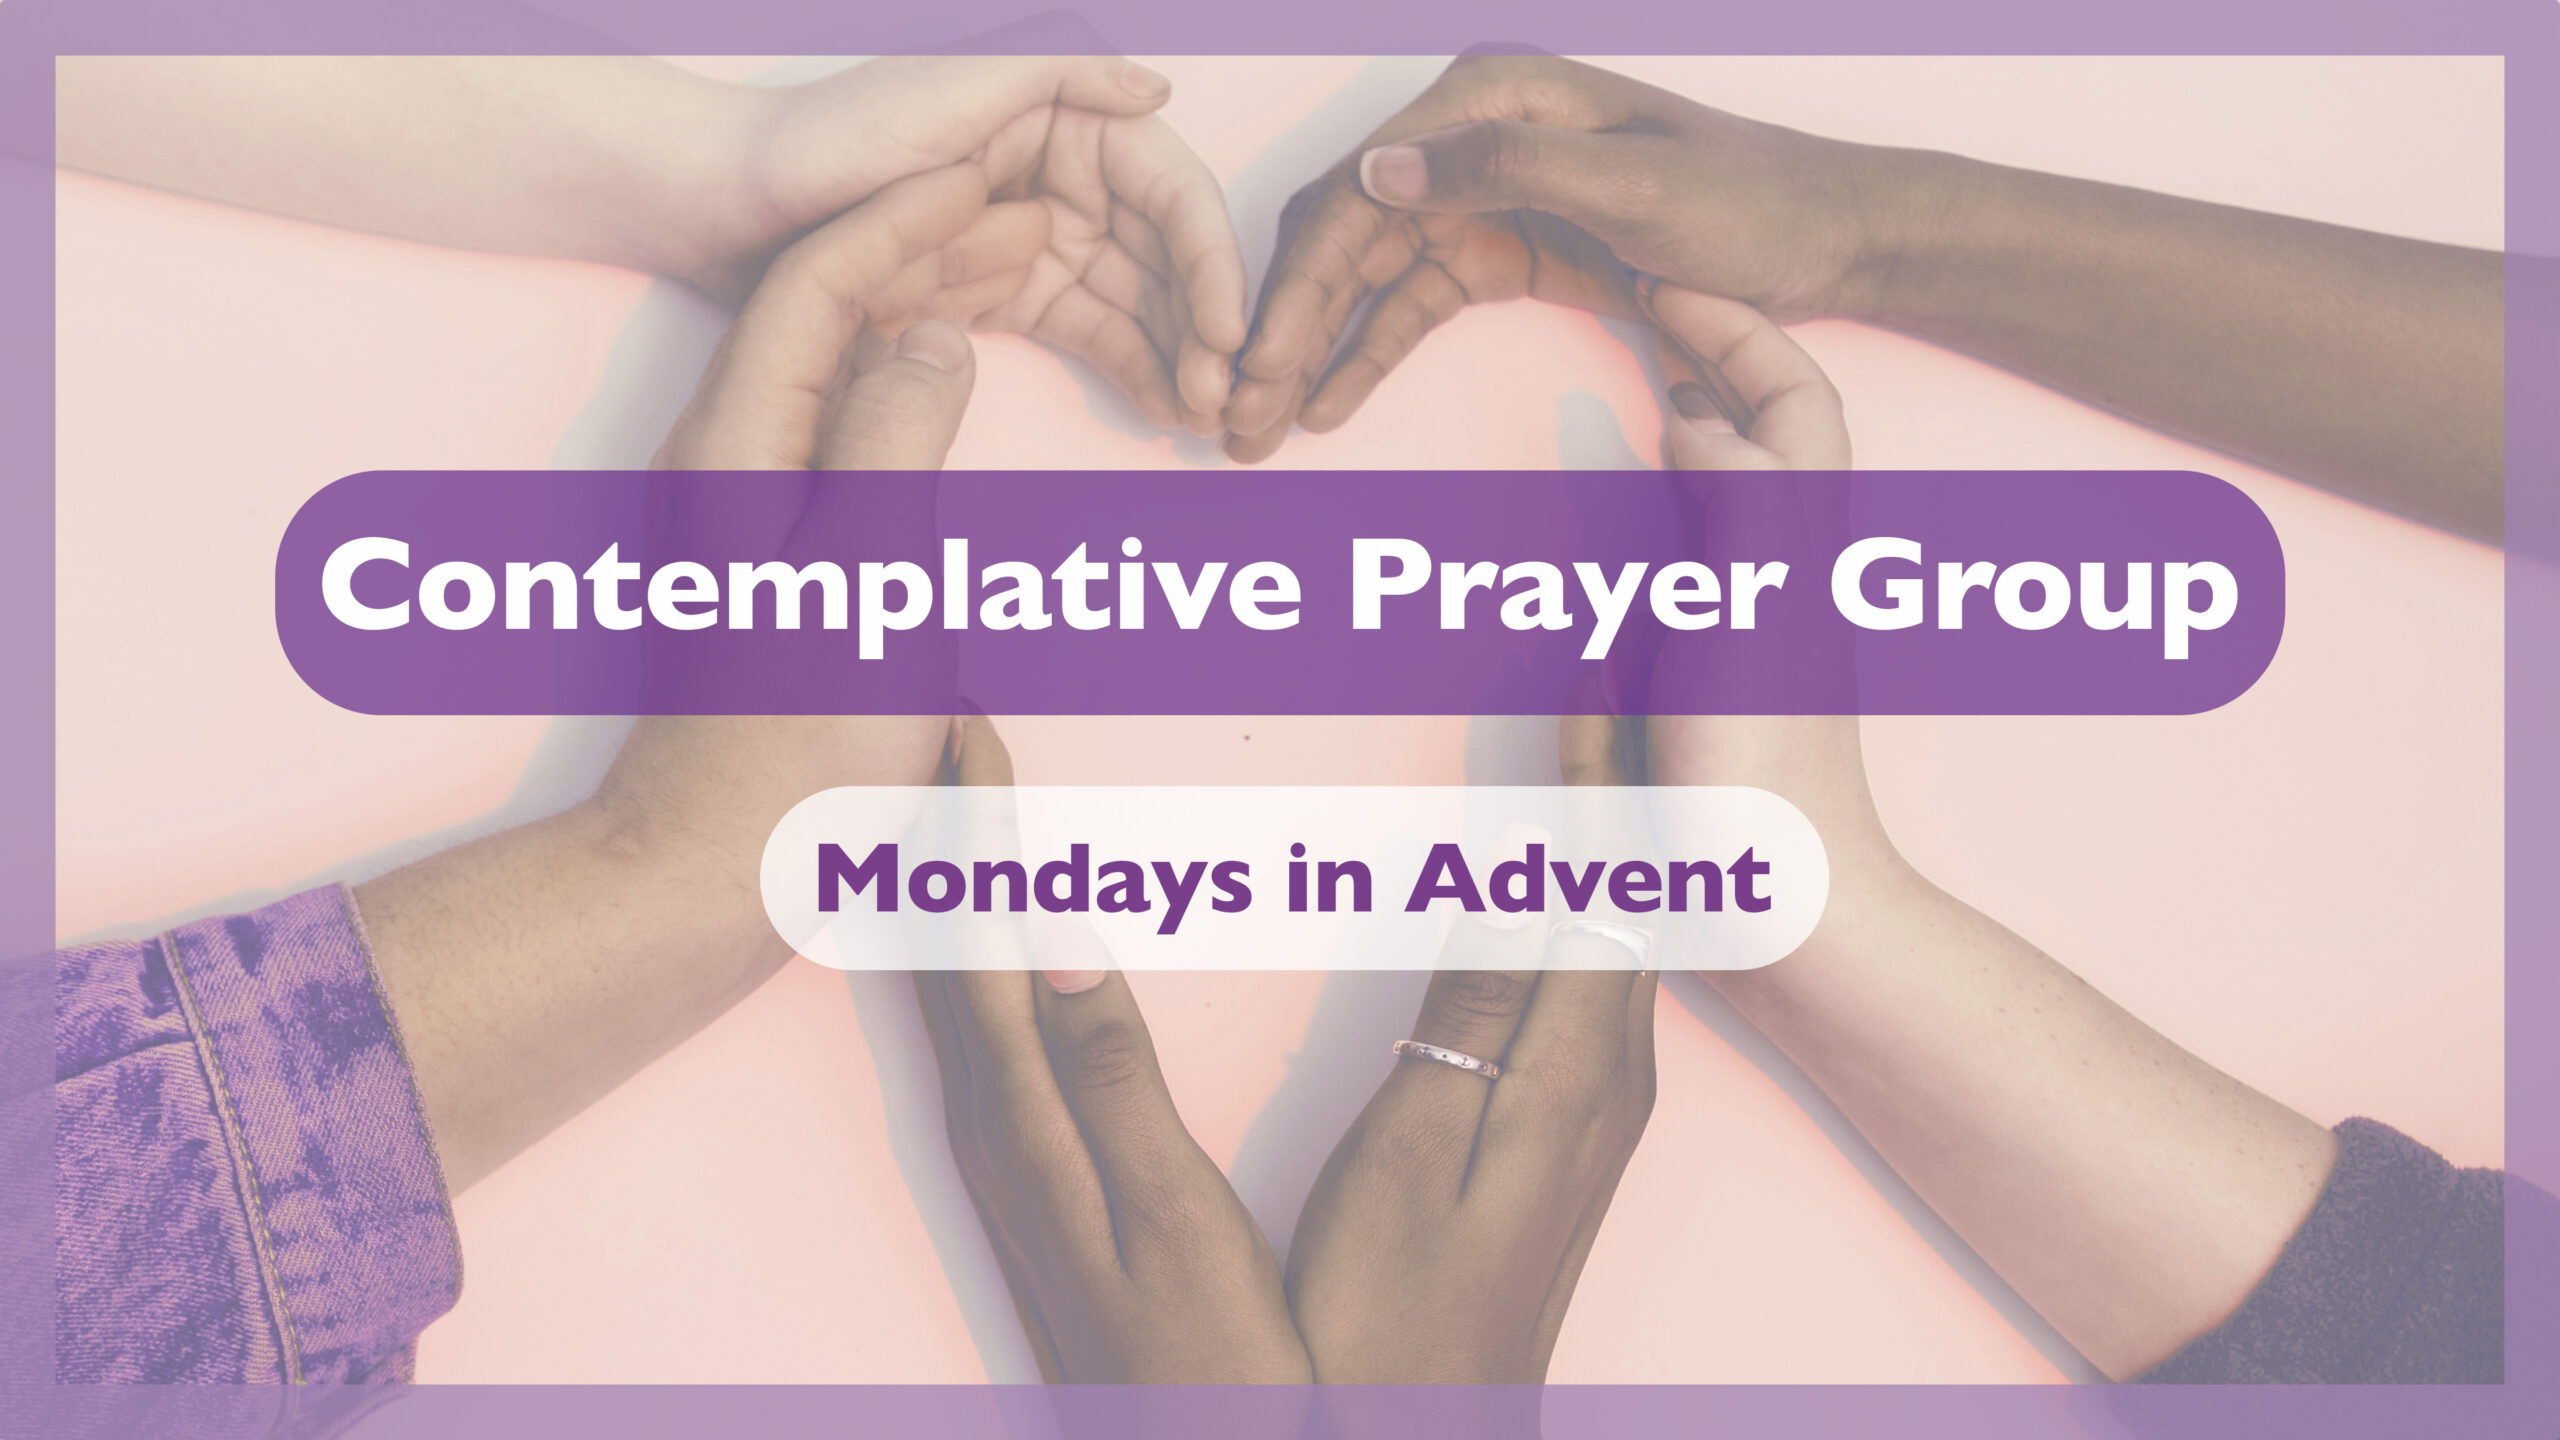 Contemplative Prayer Group - Monday's in Advent